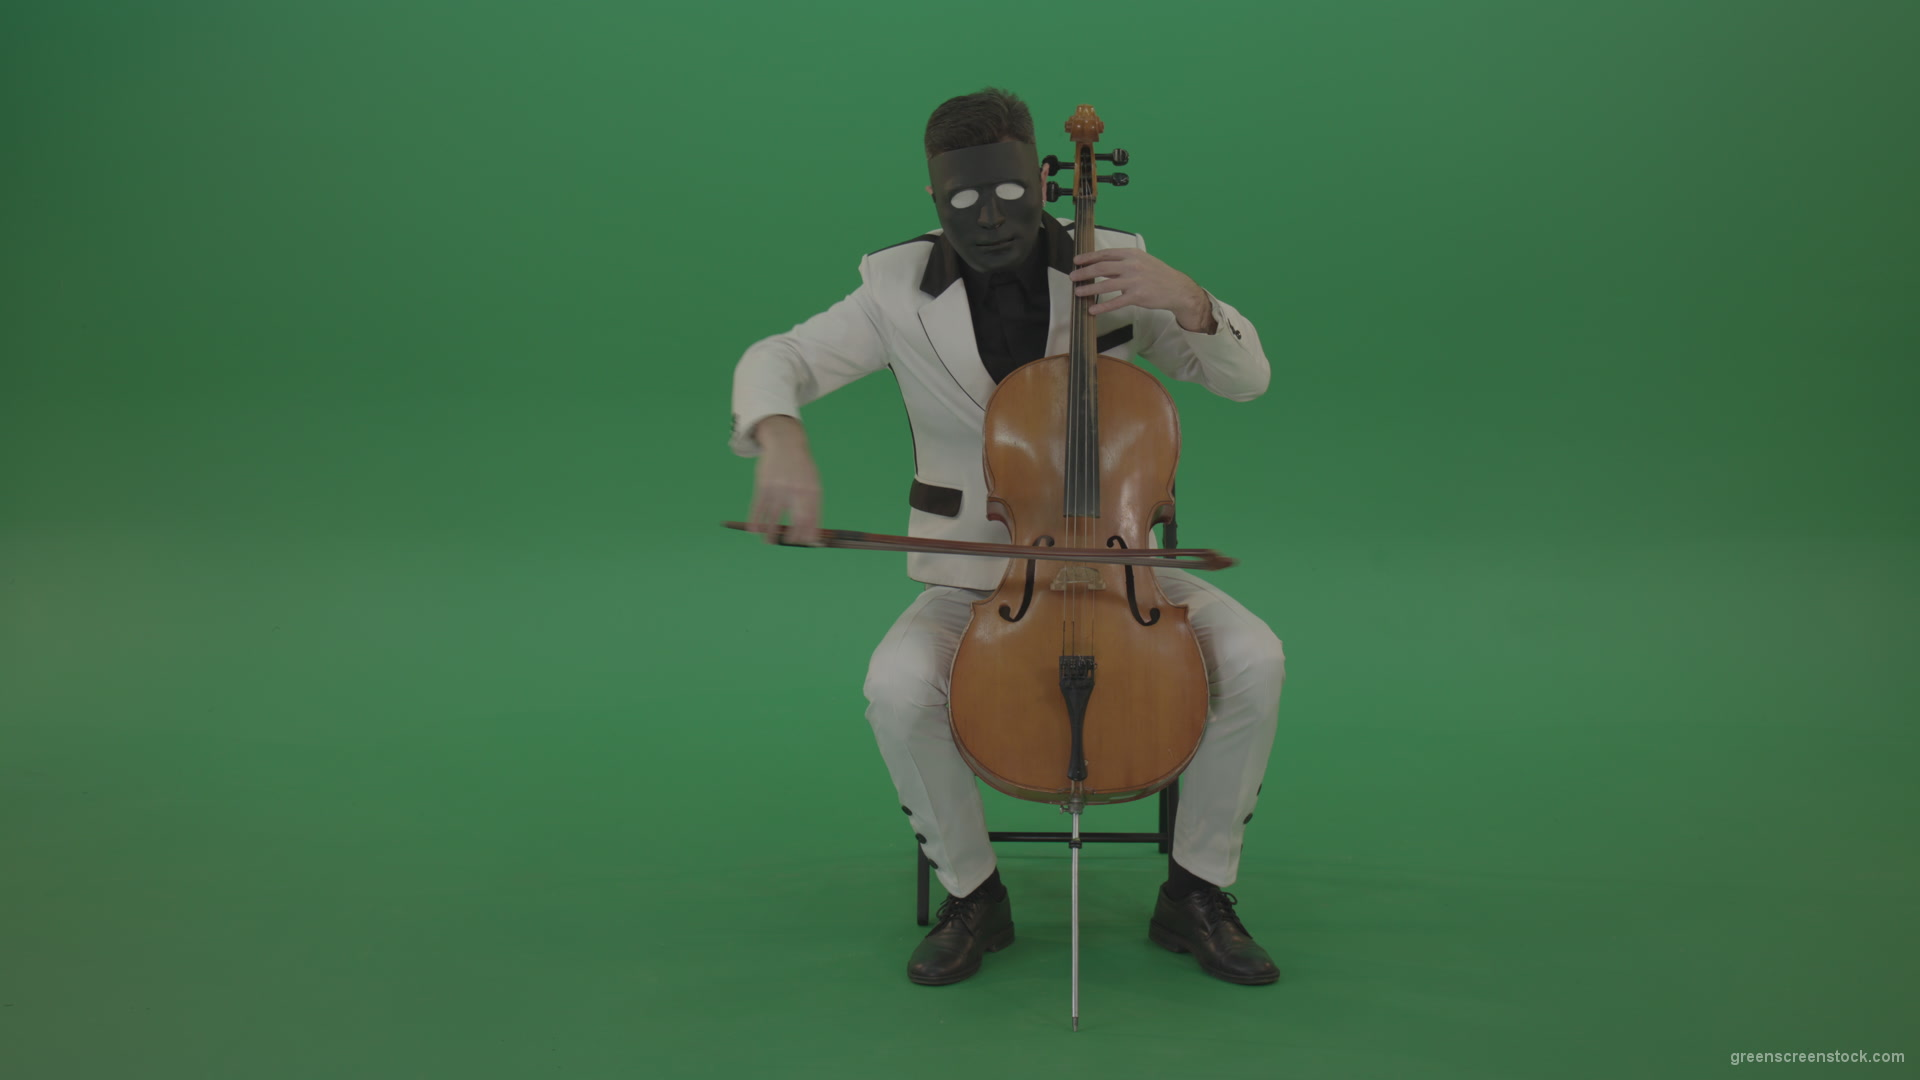 Man-plays-on-a-cello-in-a-white-suit-and-a-black-mask-with-white-eyes_006 Green Screen Stock